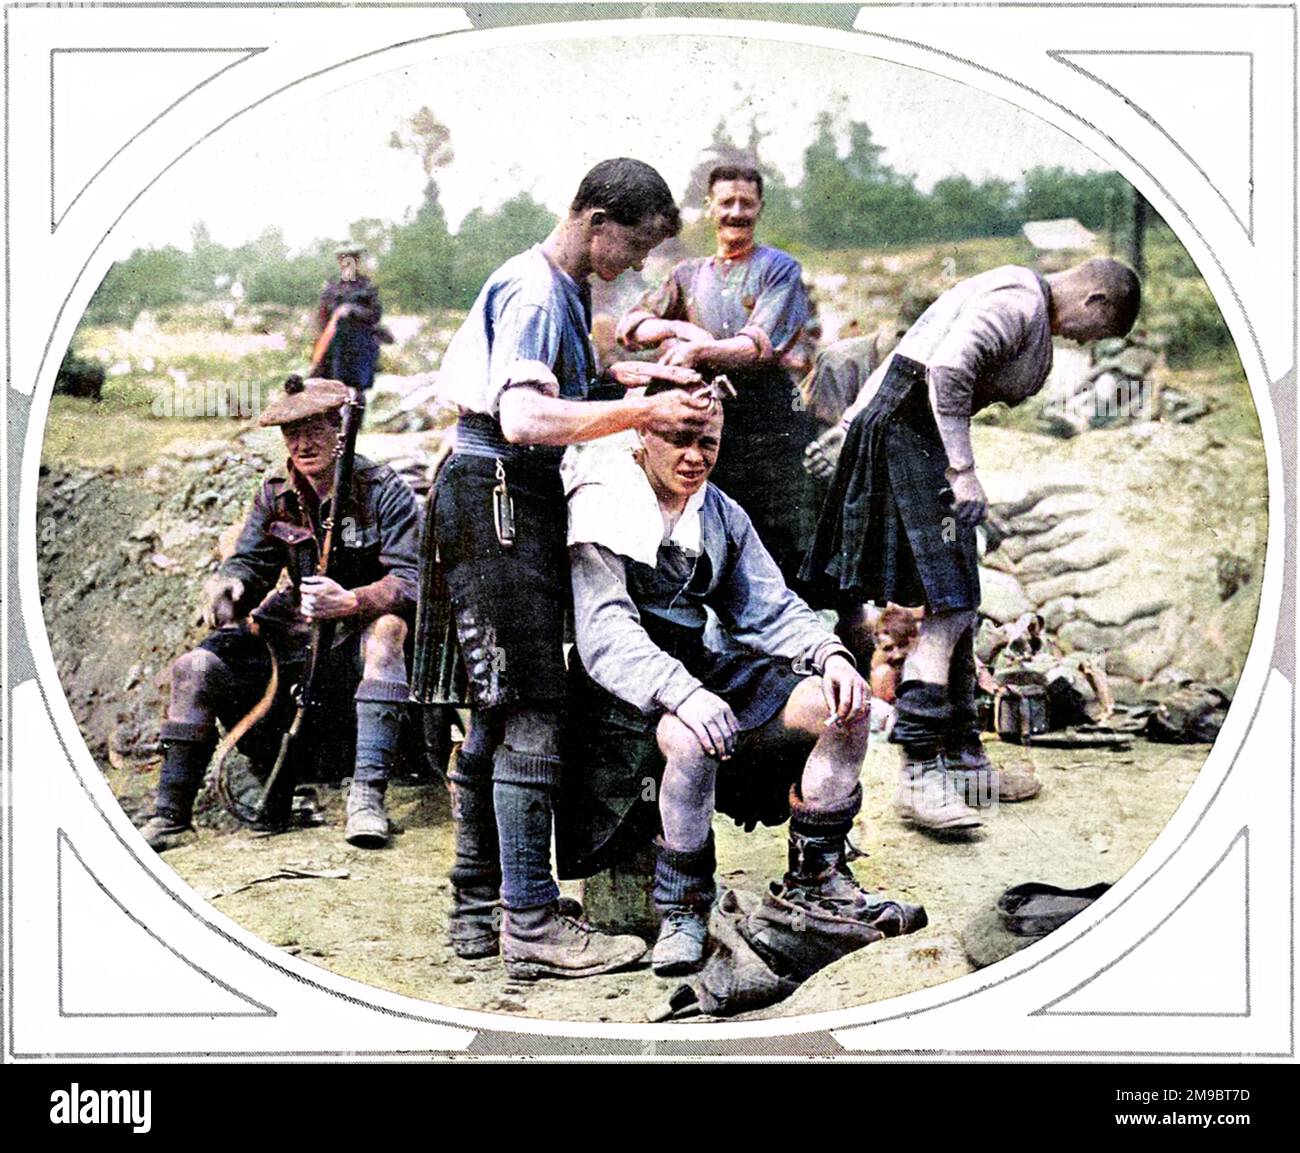 A Scottish army barber is shown cutting another soldier's hair. Stock Photo